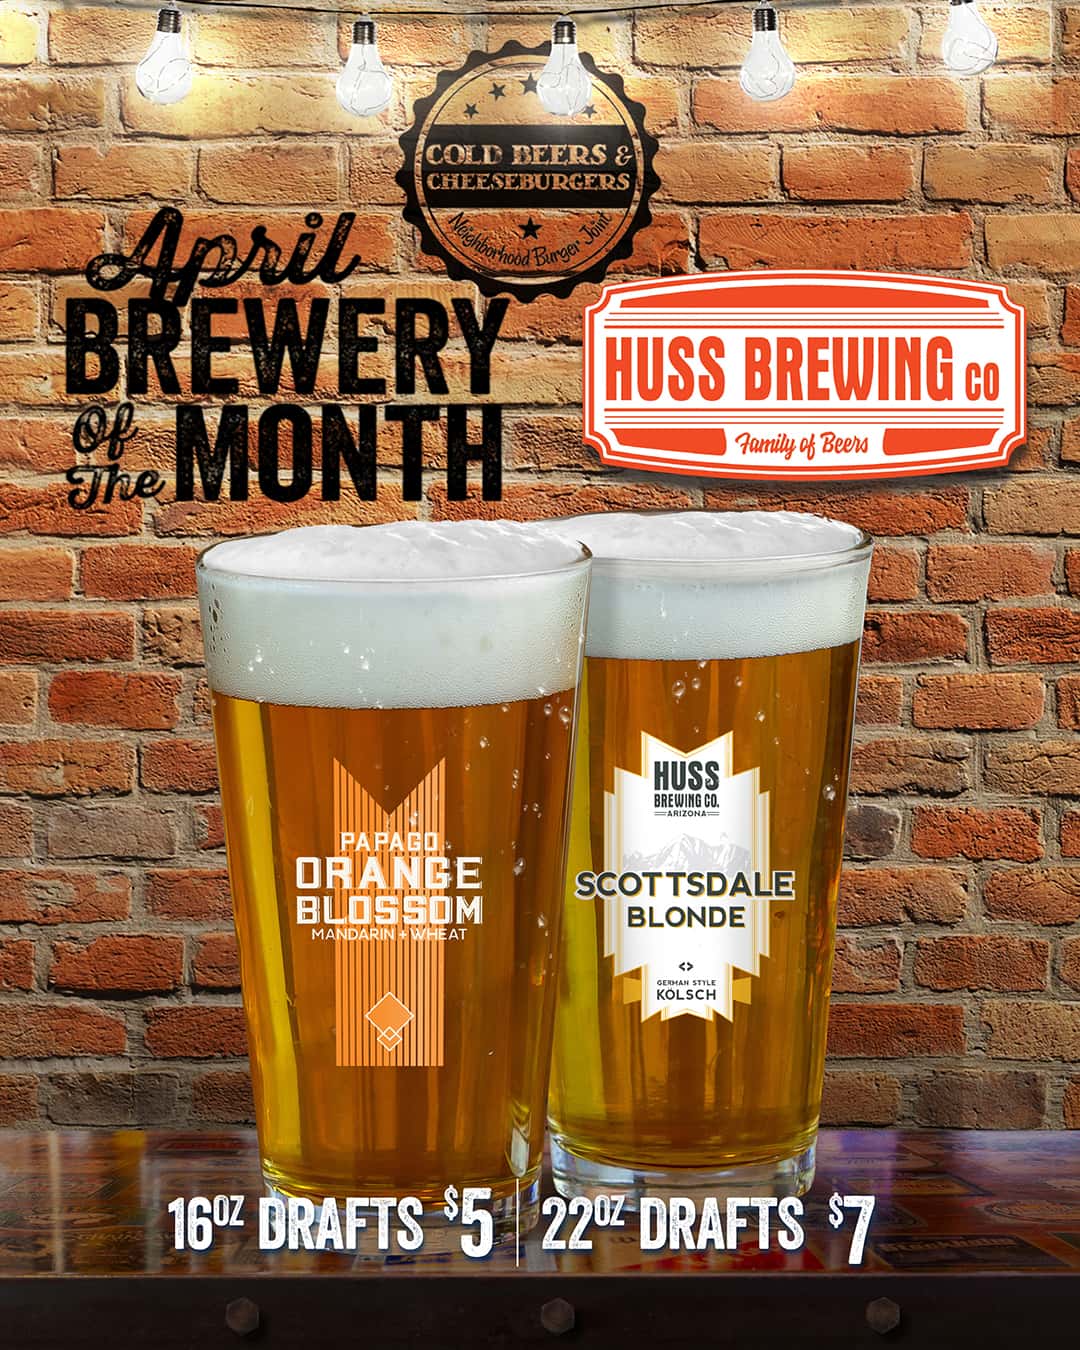 Huss Brewing, Brewery of the Month